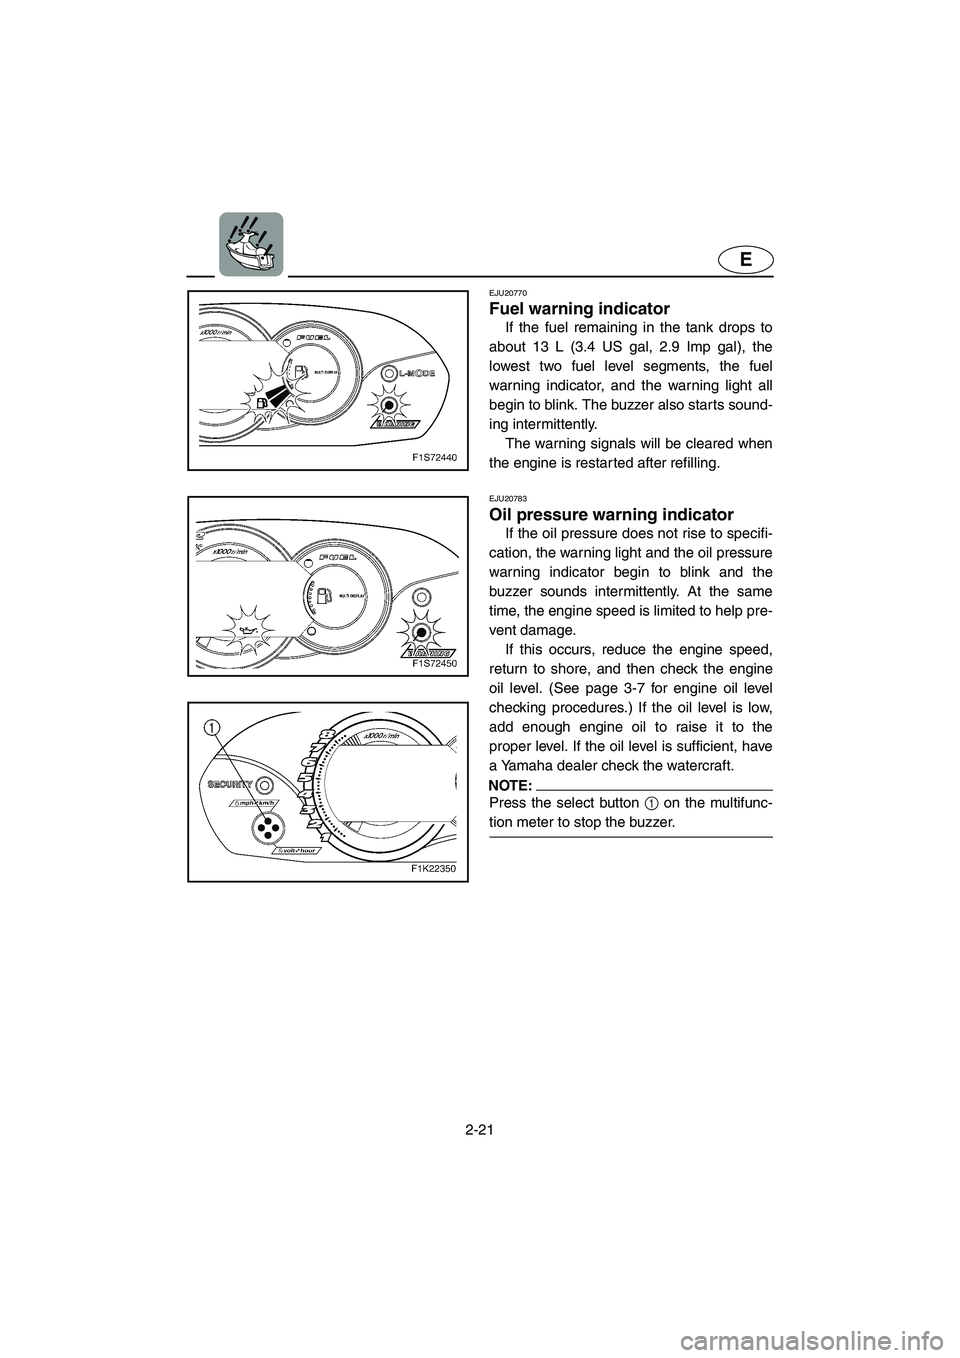 YAMAHA VX SPORT 2006  Owners Manual 2-21
E
EJU20770 
Fuel warning indicator 
If the fuel remaining in the tank drops to
about 13 L (3.4 US gal, 2.9 Imp gal), the
lowest two fuel level segments, the fuel
warning indicator, and the warnin